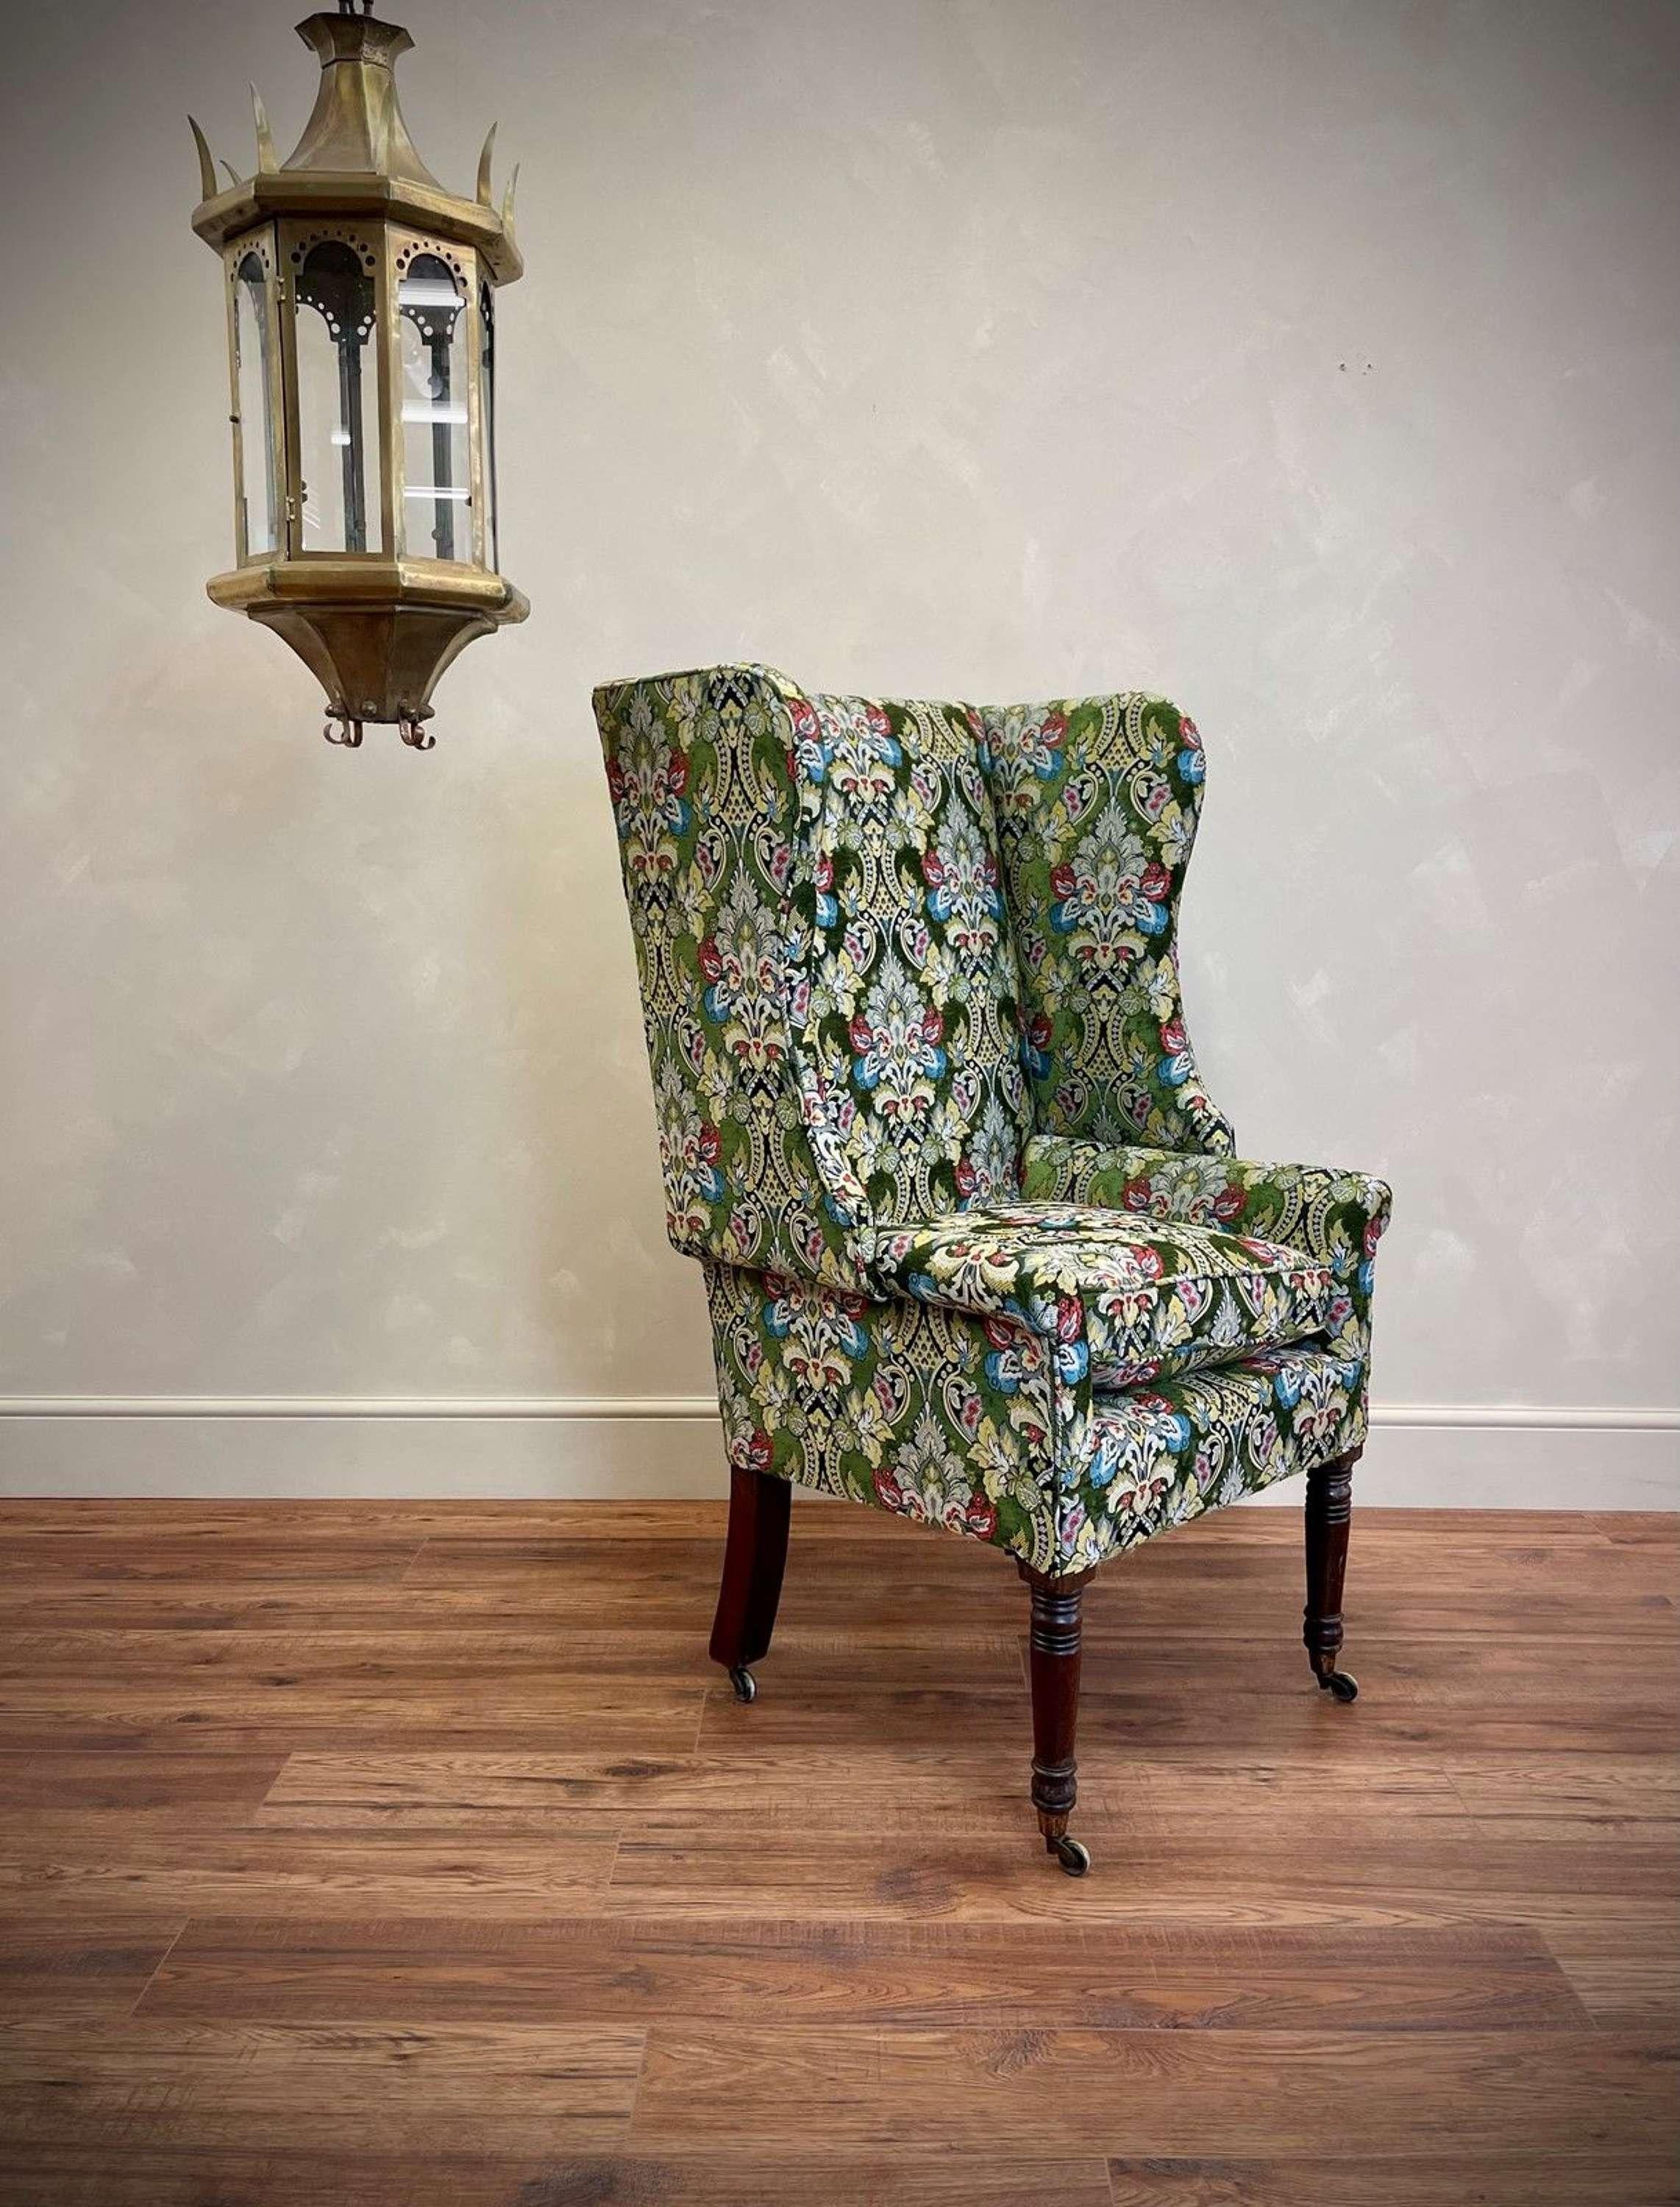 Expert upholstery job on this hi-back Georgian winged chair with epic form and proportions.
The tall, turned front legs with casters add to its grandeur.
Pure quality tapestry and chenille fabric, which also covers a plump, feather filled seat